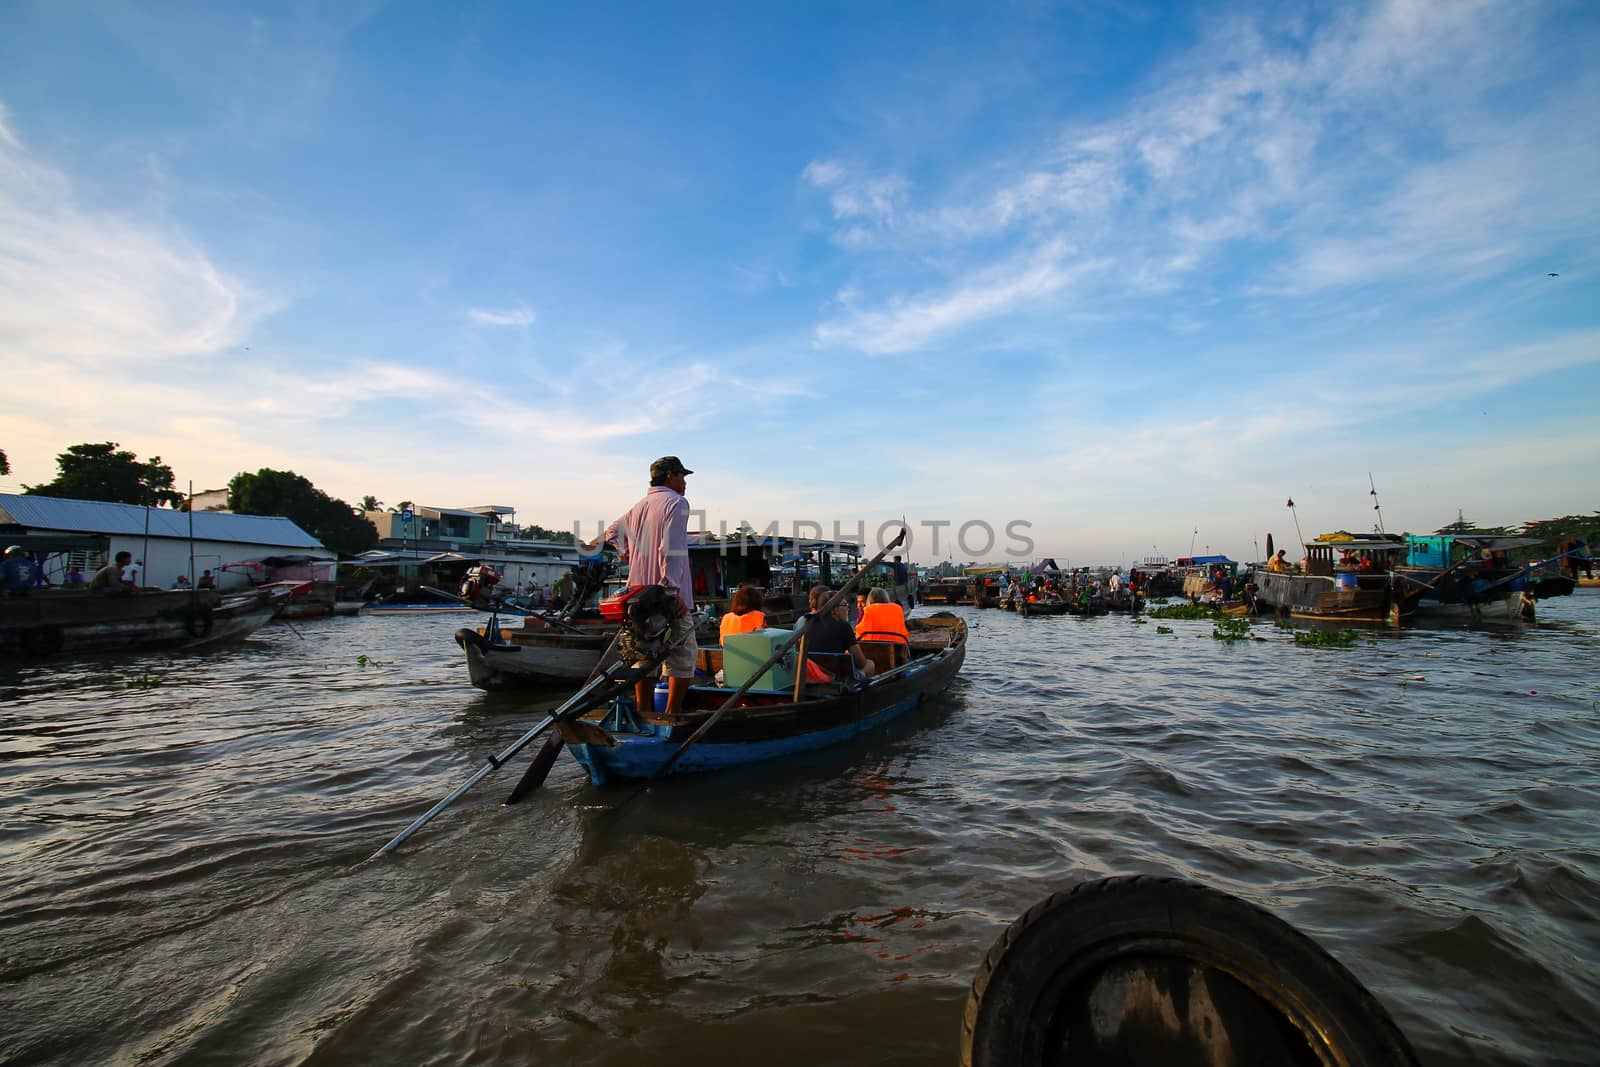 Everyday life in Cai Rang Floating Market in Can tho, Vietnam which is a popular tourist destination and considered to be the largest traditional floating market in Asia